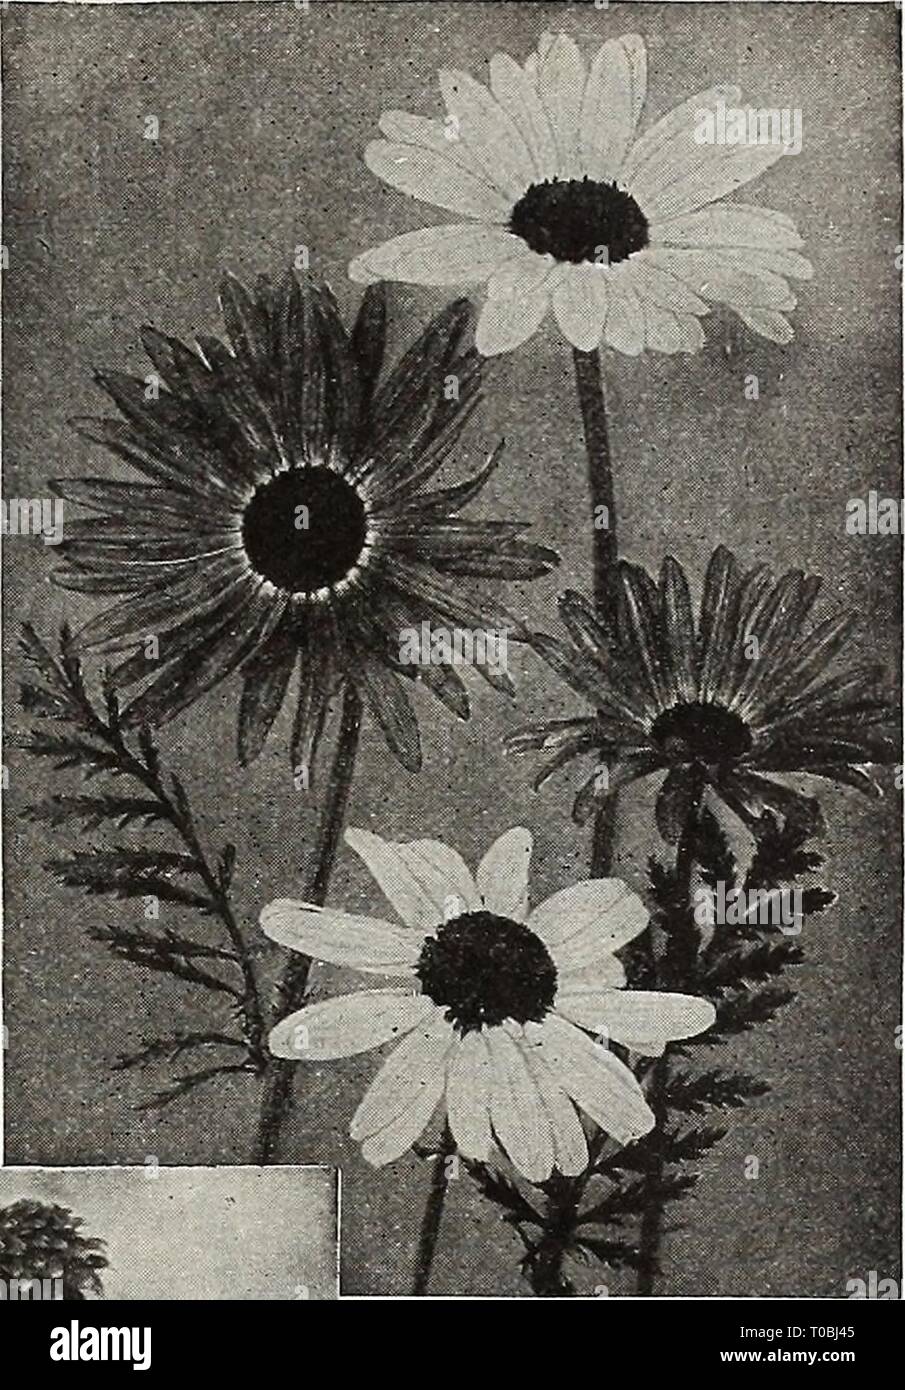 Dreer's garden book 1918 (1918) Dreer's garden book 1918 dreersgardenbook1918henr Year: 1918  Pyrethrum Hybridum RHODANTHE (Swan River Everlasting) PER PKT 3860 Acharmingannual; suc- ceeds in a light rich soil and a warm shel- tered situation; valu- able for pot culture; flowers everlasting; mixed colors; 1 foot Sanvitalia Procumbbns ^yjfff ^^^^^^i^S|Pj&L--. Rudbeckia Bicolor Superea 10 RICINUS (Caster Oil Bean) Ornamental plants of stately growth and picturesque foliage, with brilliant colored fruit, pro- ducing sub-tropical effect; fine for lawns, massing or centre plants for beds. 3862 Camb Stock Photo